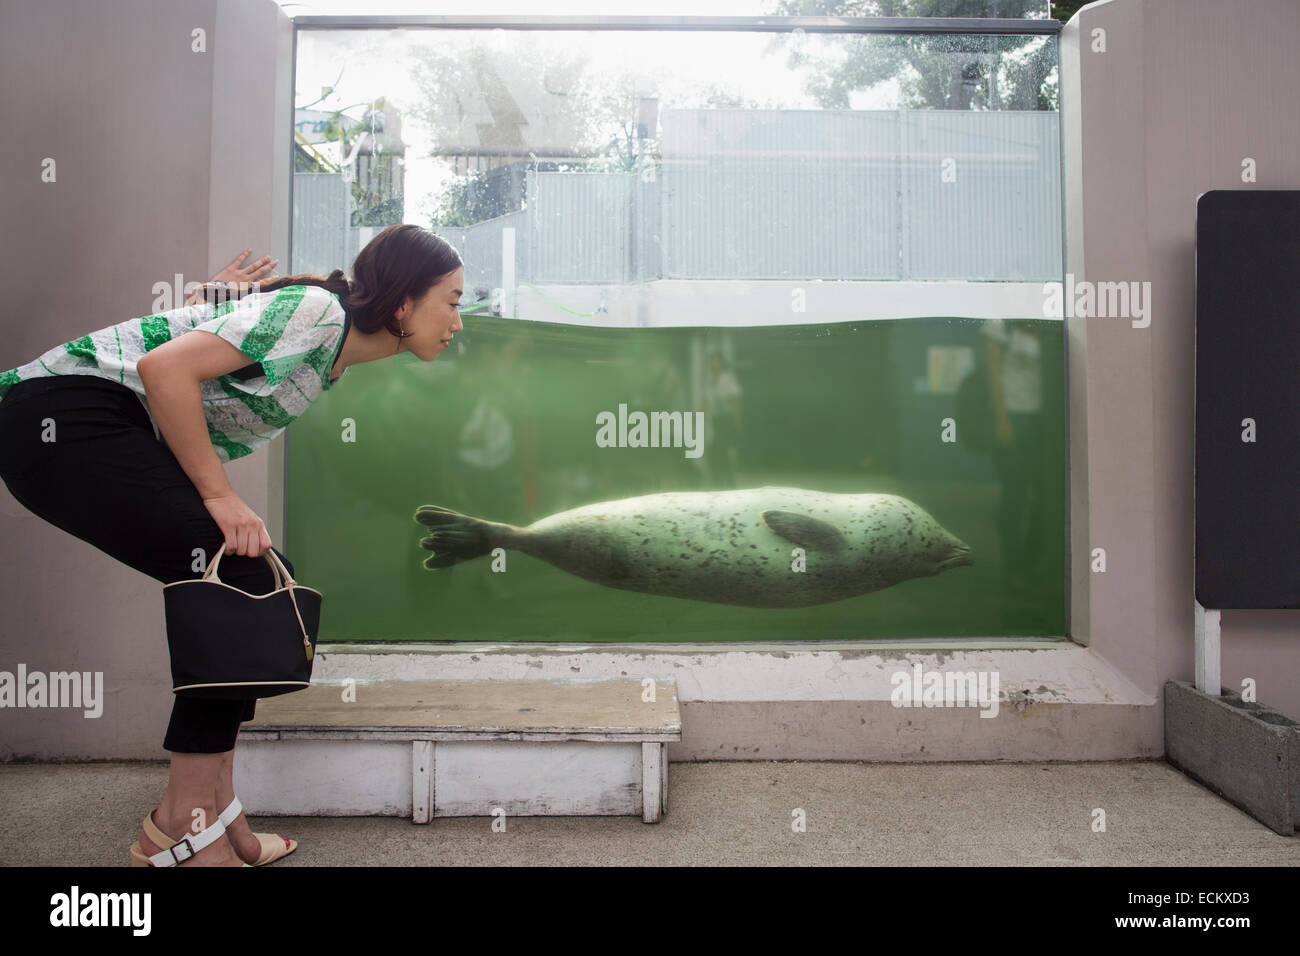 A woman crouching by a marine tank at an aquarium exhibit.  An animal in the water. Stock Photo